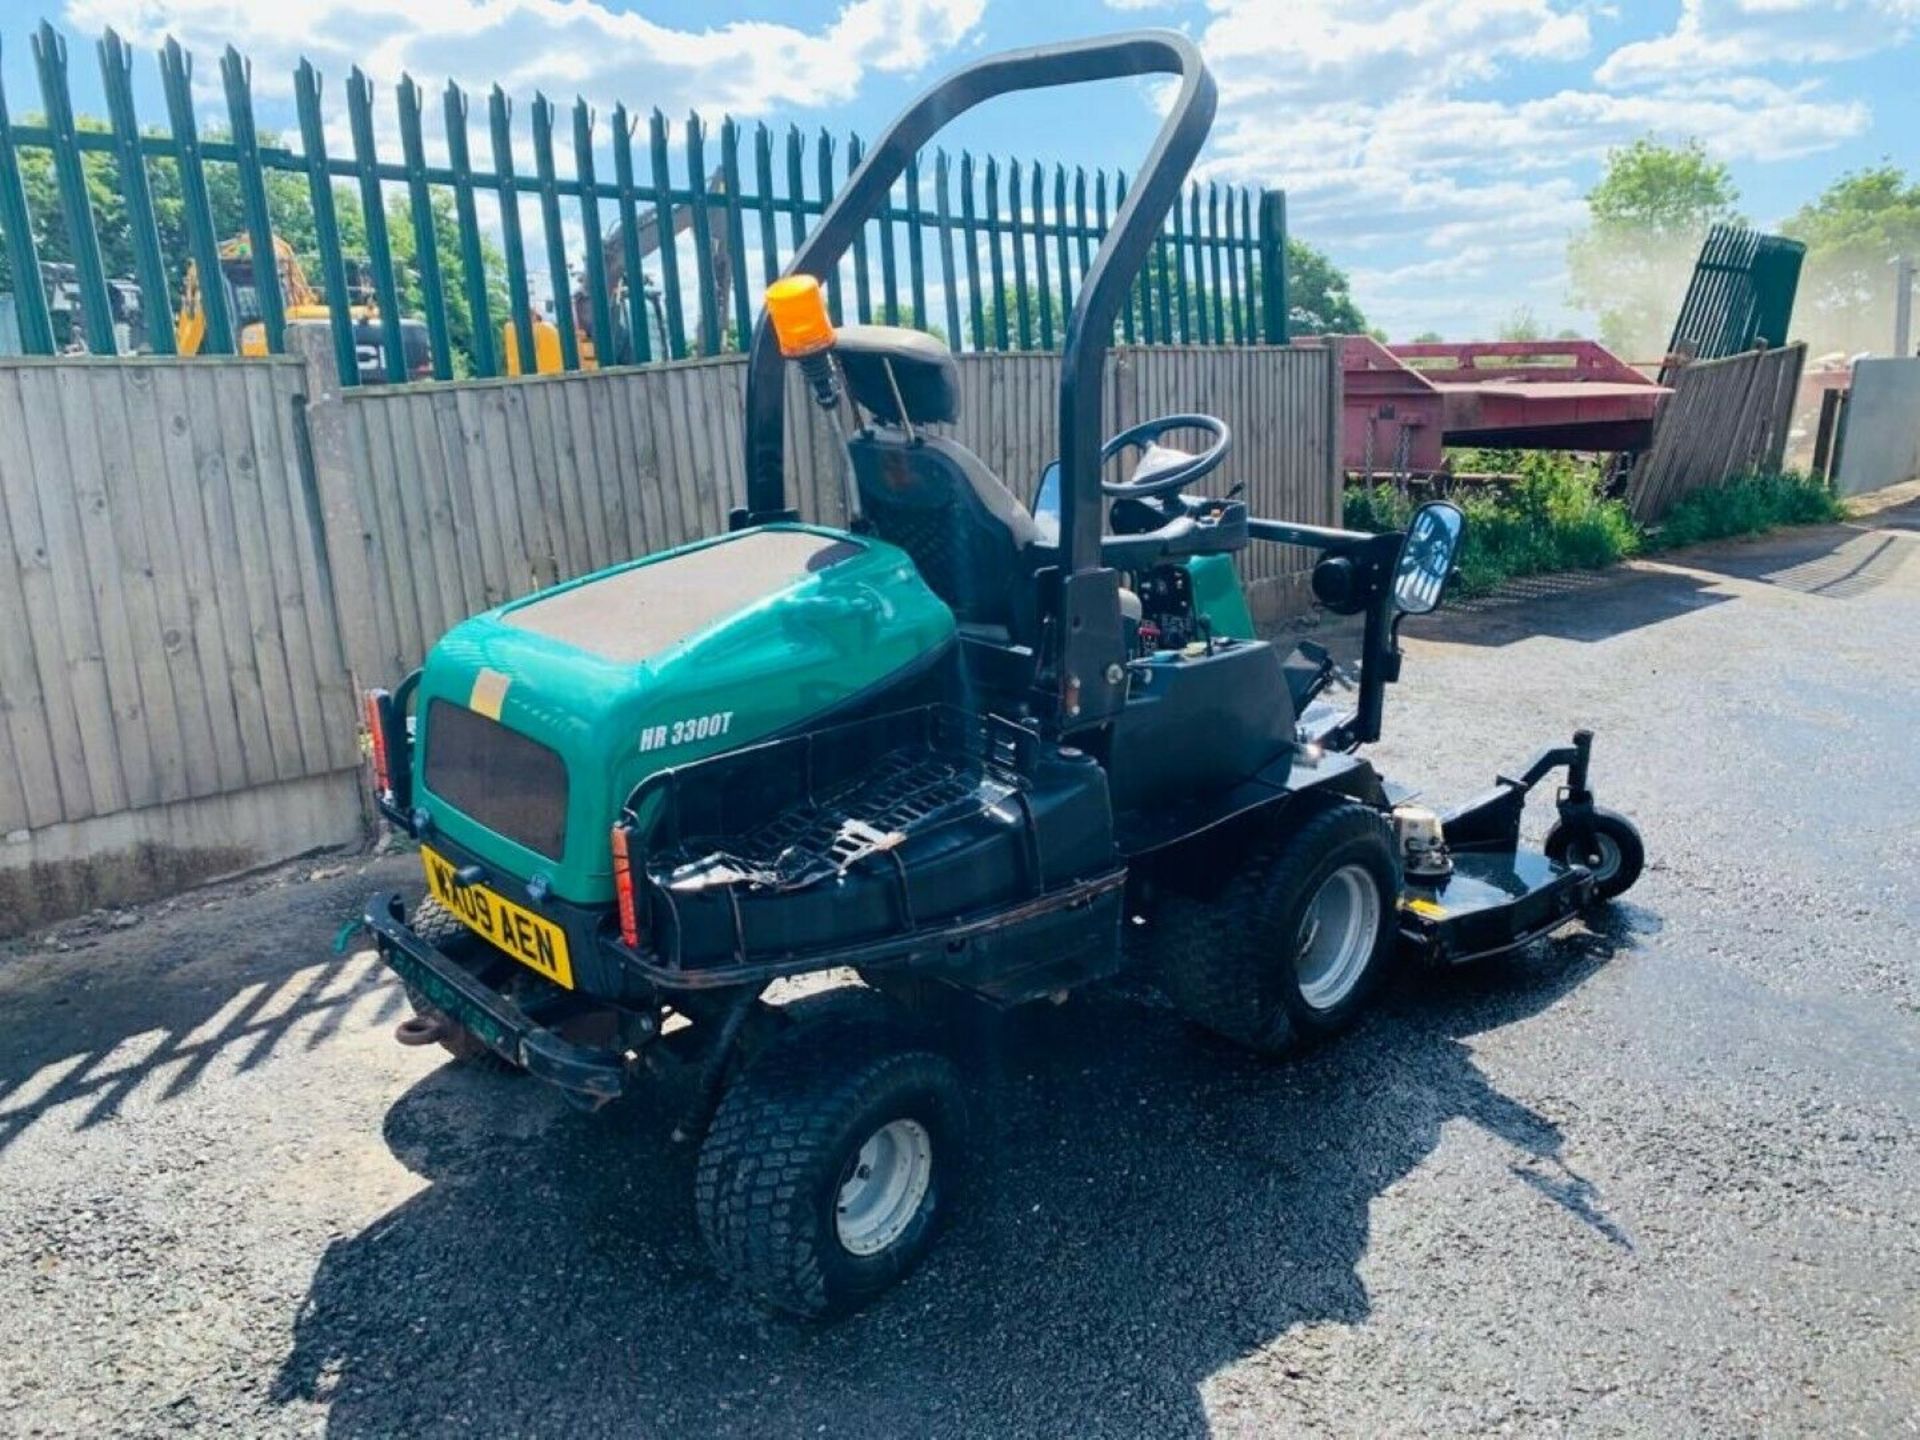 Ransomes Rotary Mower HR3300T 20094 WD - Image 11 of 12